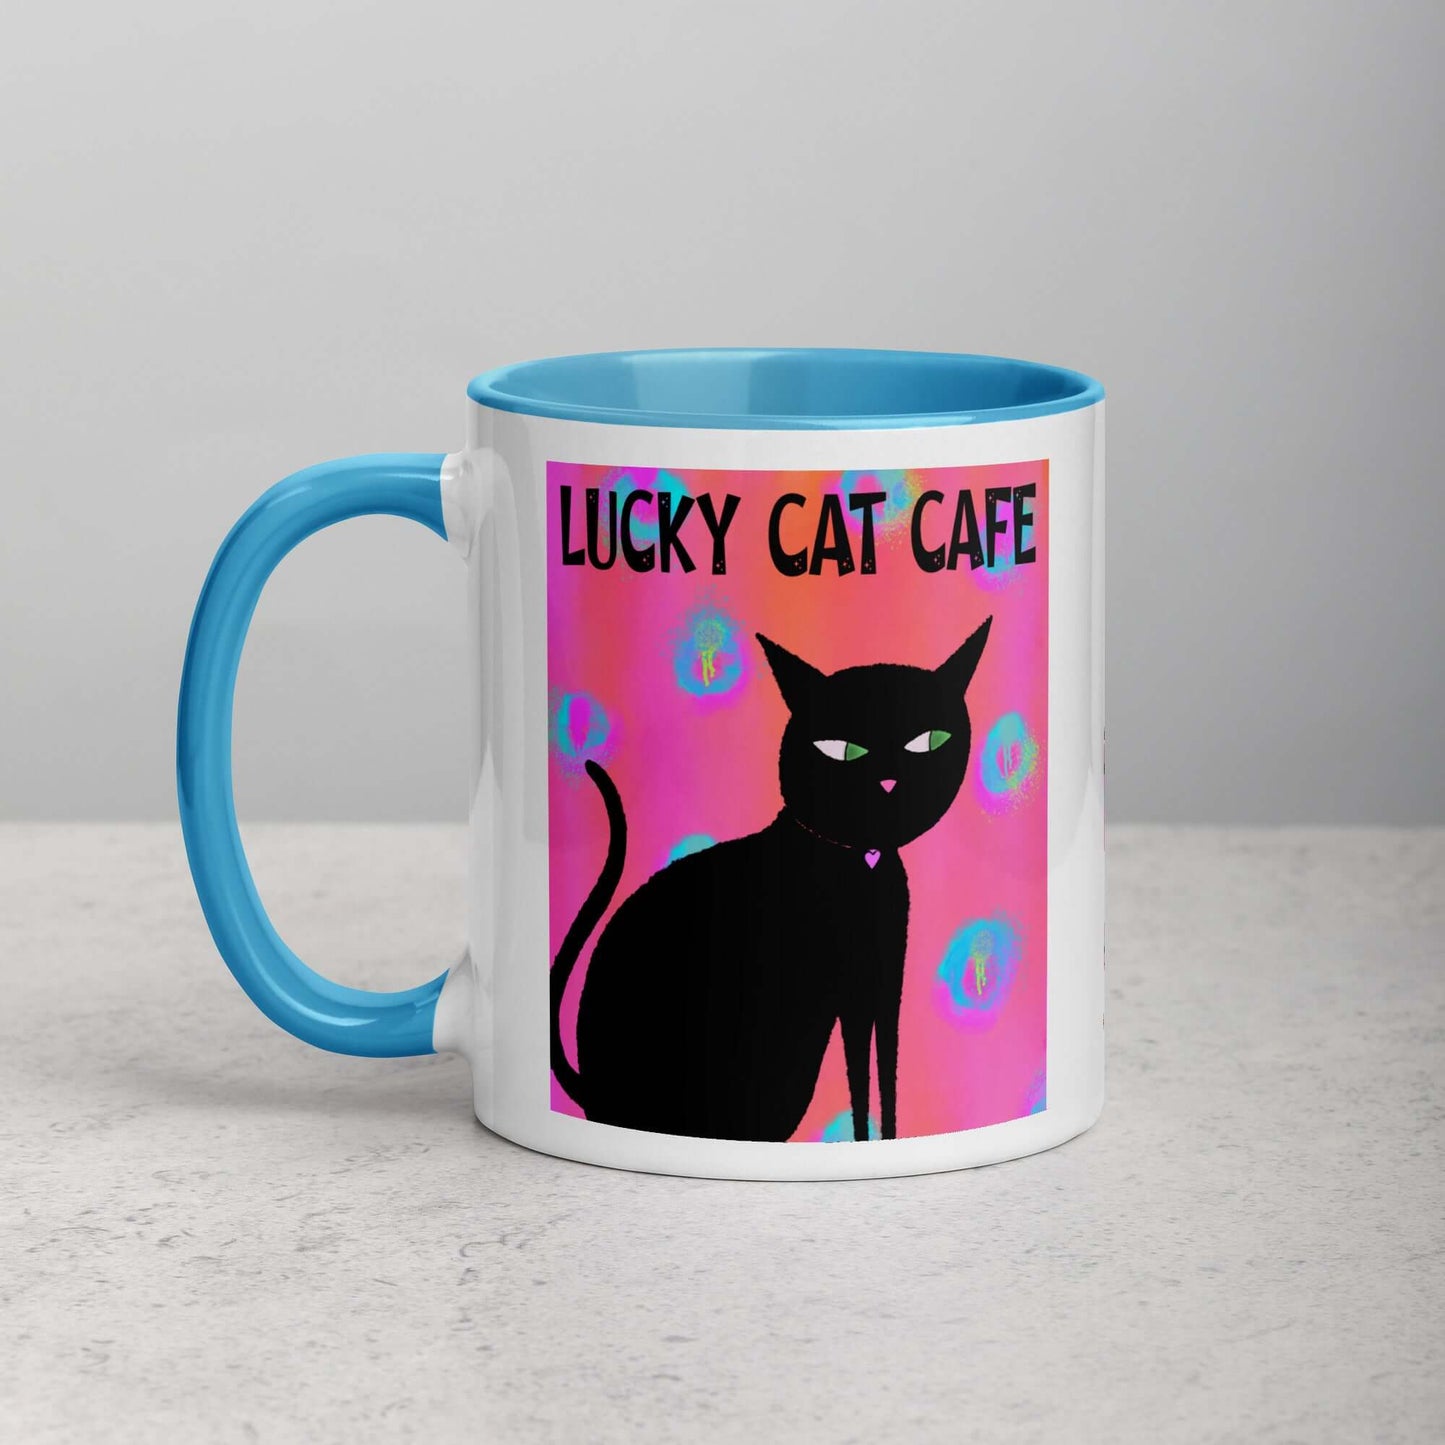 Black Cat on Hot Pink Tie Dye Background with Text “Lucky Cat Cafe” Mug with Light Blue Color Inside Left Handed Front View